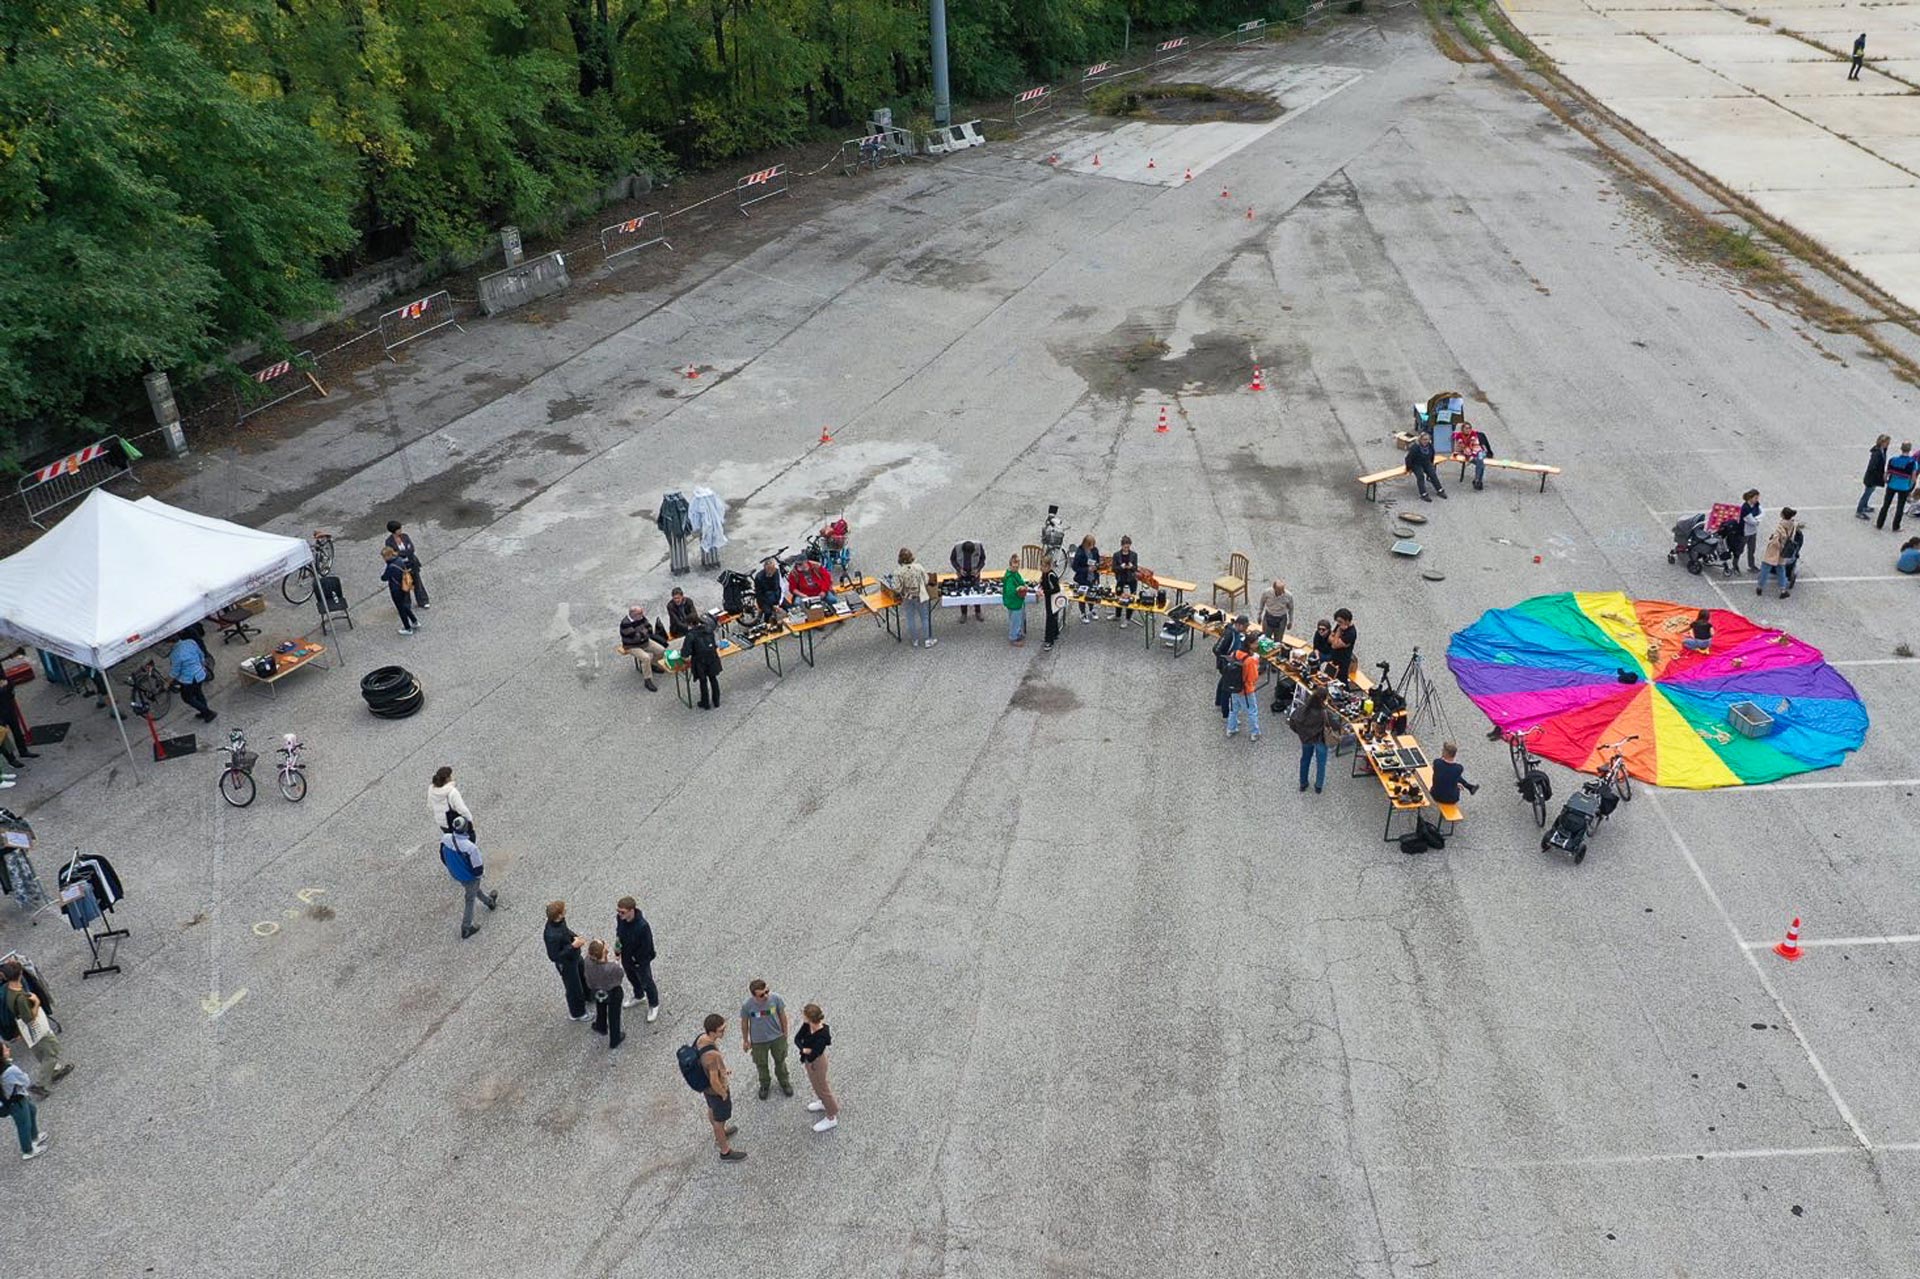 aerial view of flea market at A place to B(z) – The Art of Public Space